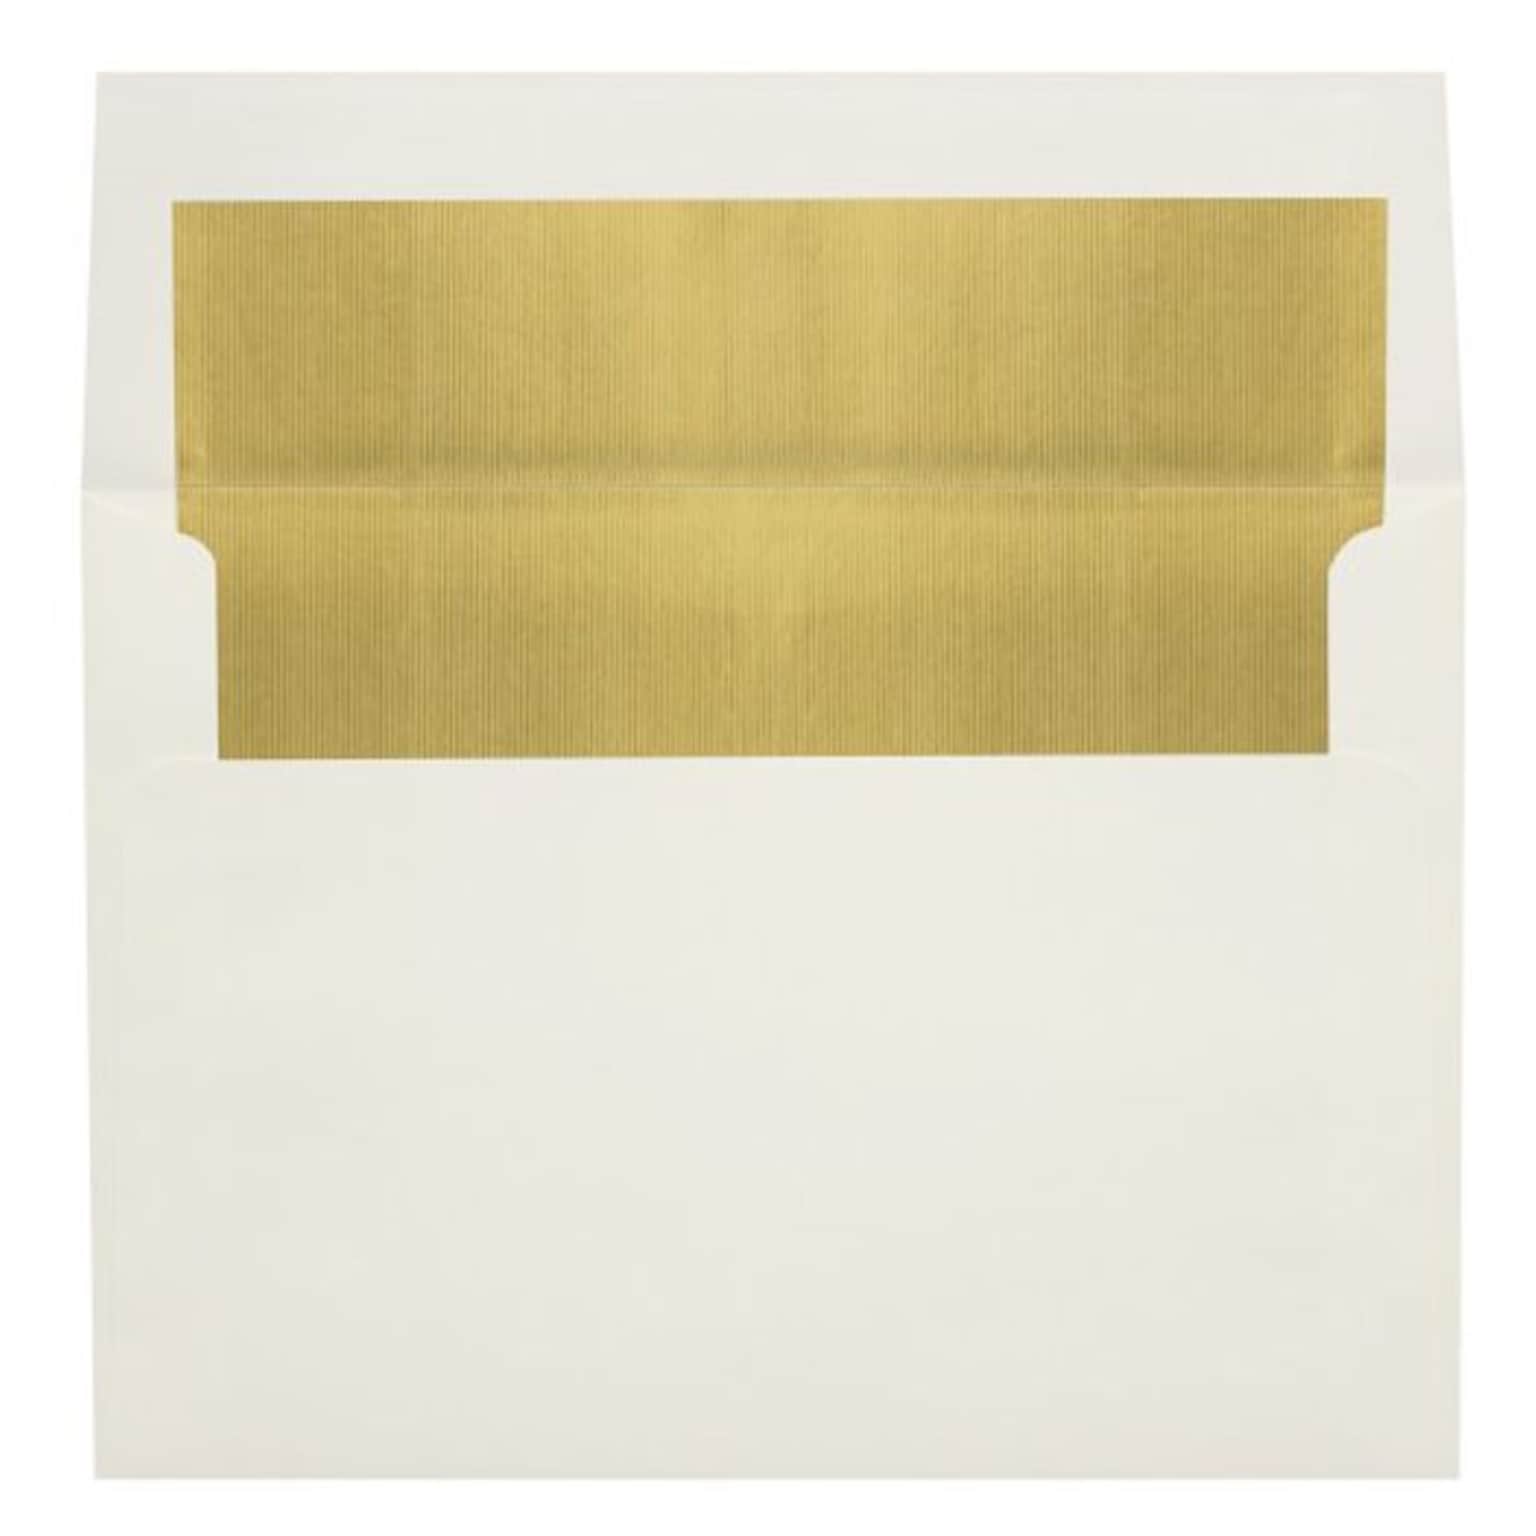 Lux® 5 1/4 x 7 1/4 70lbs. Lined Envelopes W/Peel & Press; Natural/Gold LUX Lining